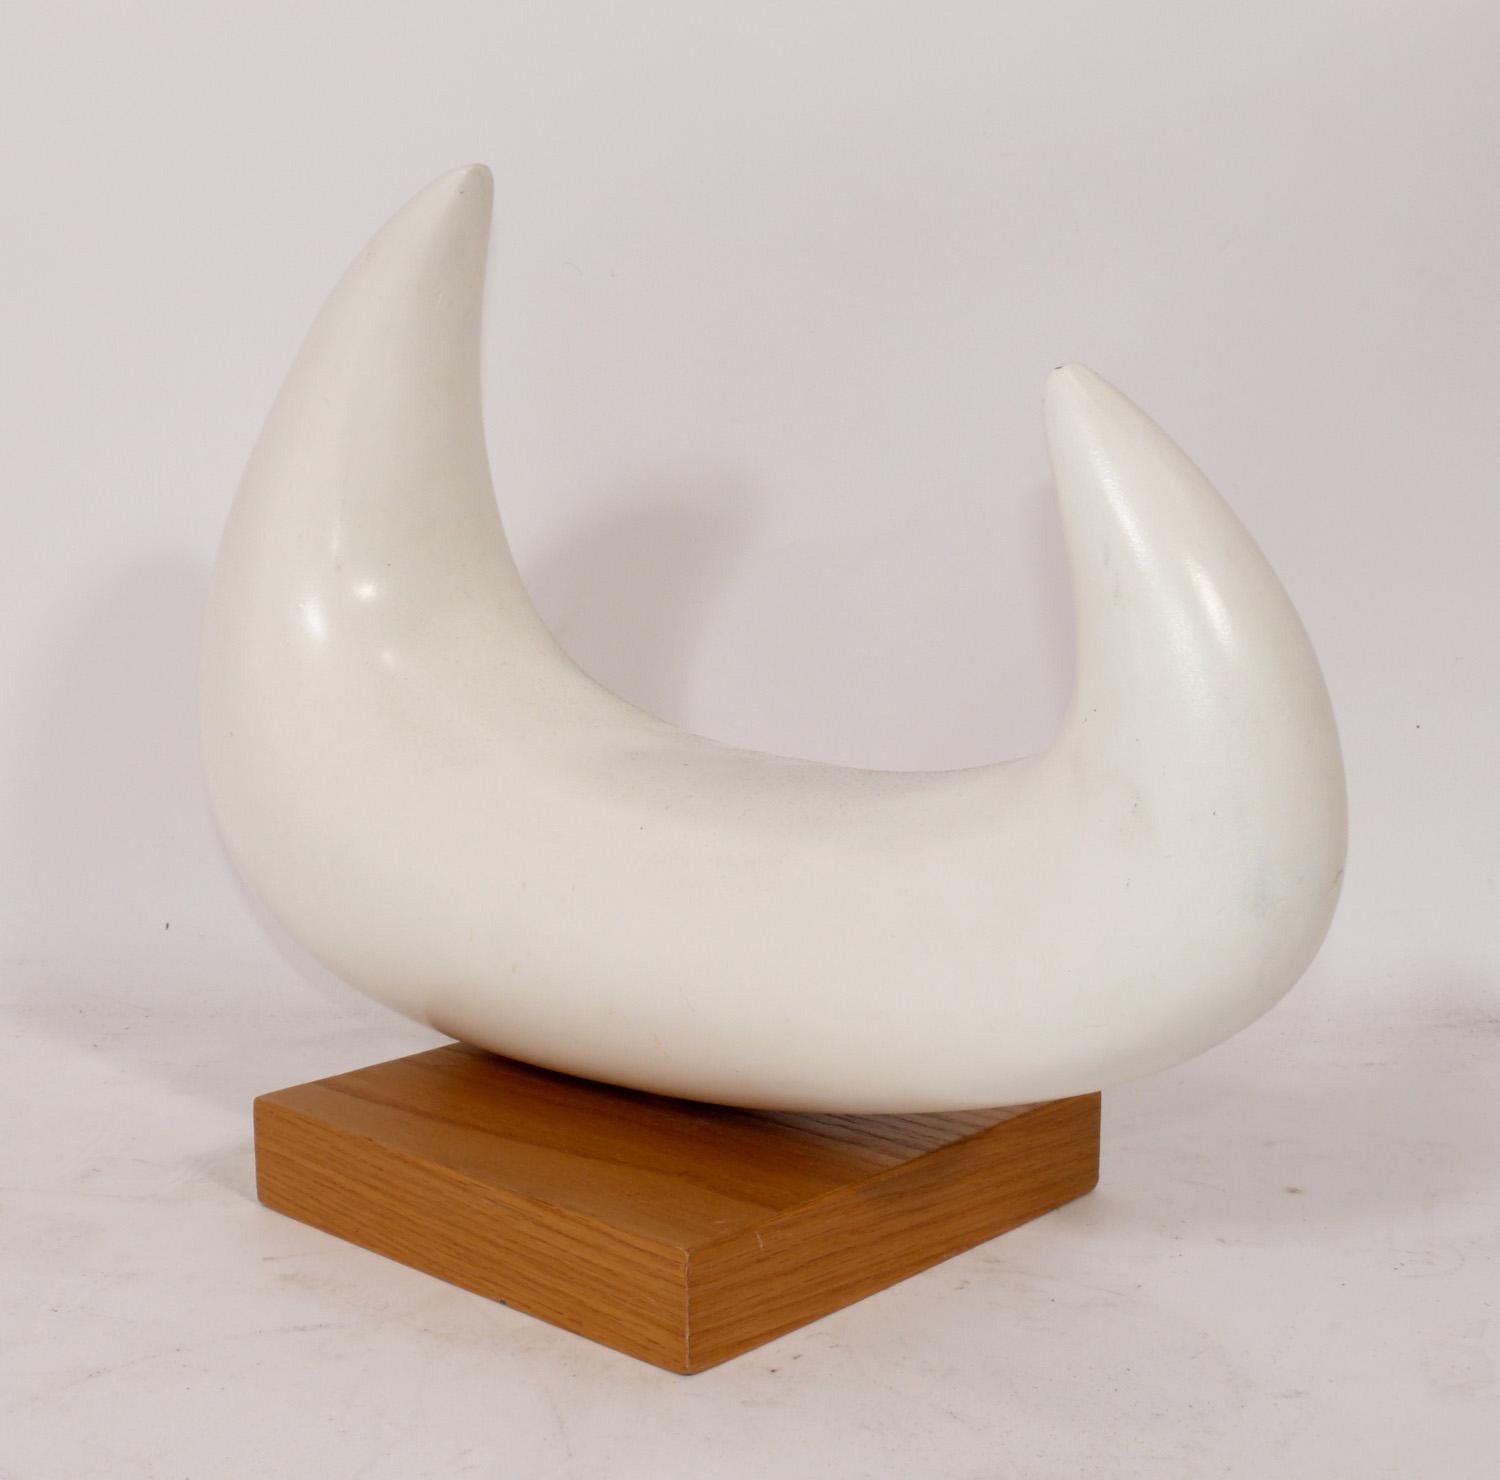 Abstract Modernist Sculpture, American, circa 1960s. Believed to constructed of plaster or resin on a natural wood base.